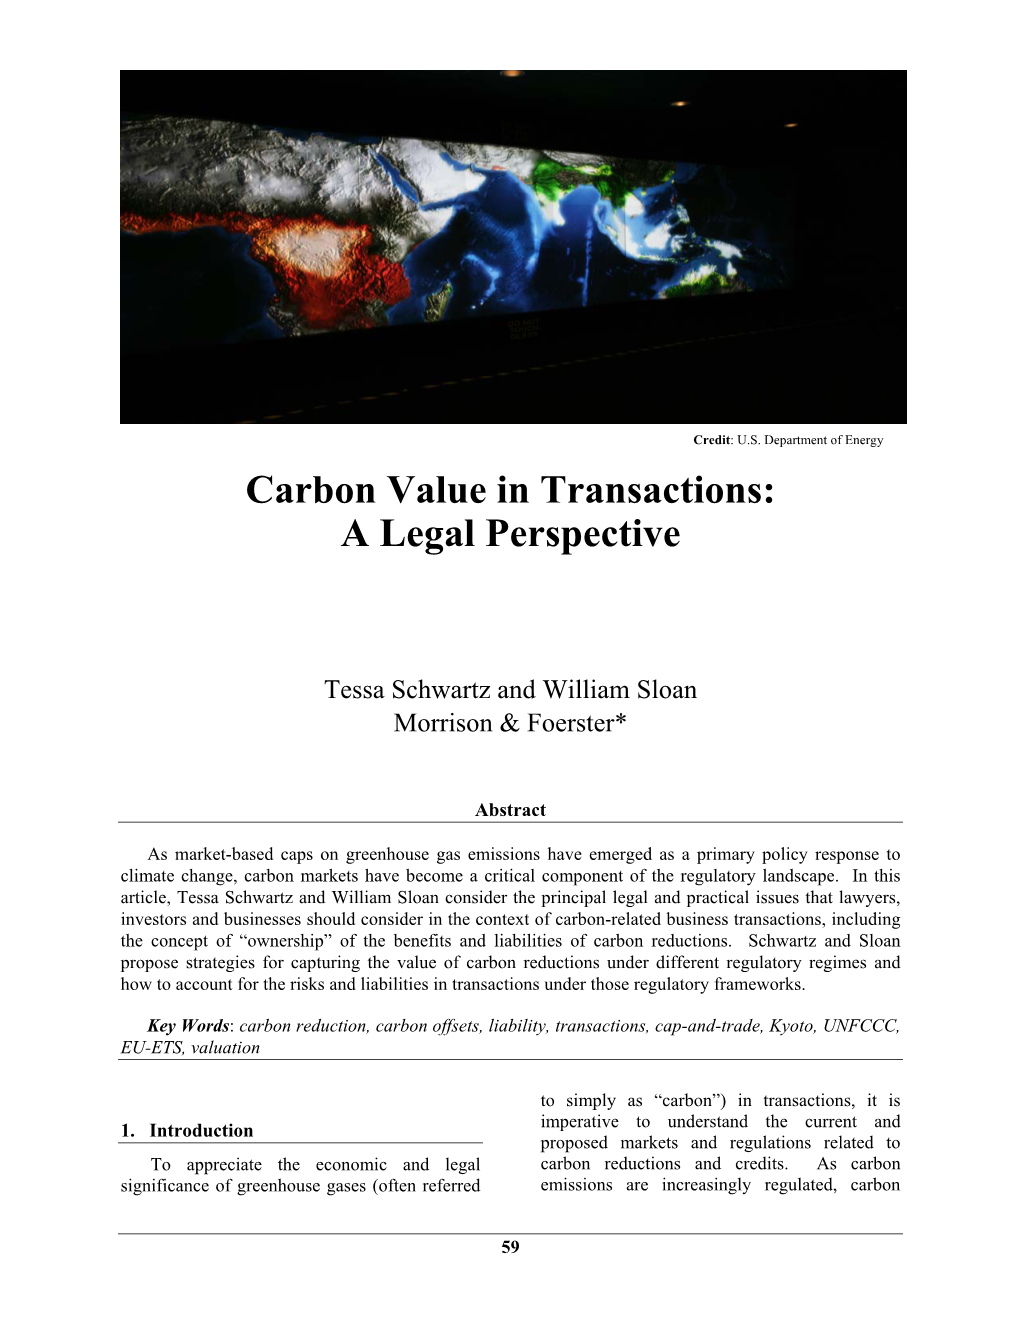 Carbon Value in Transactions: a Legal Perspective